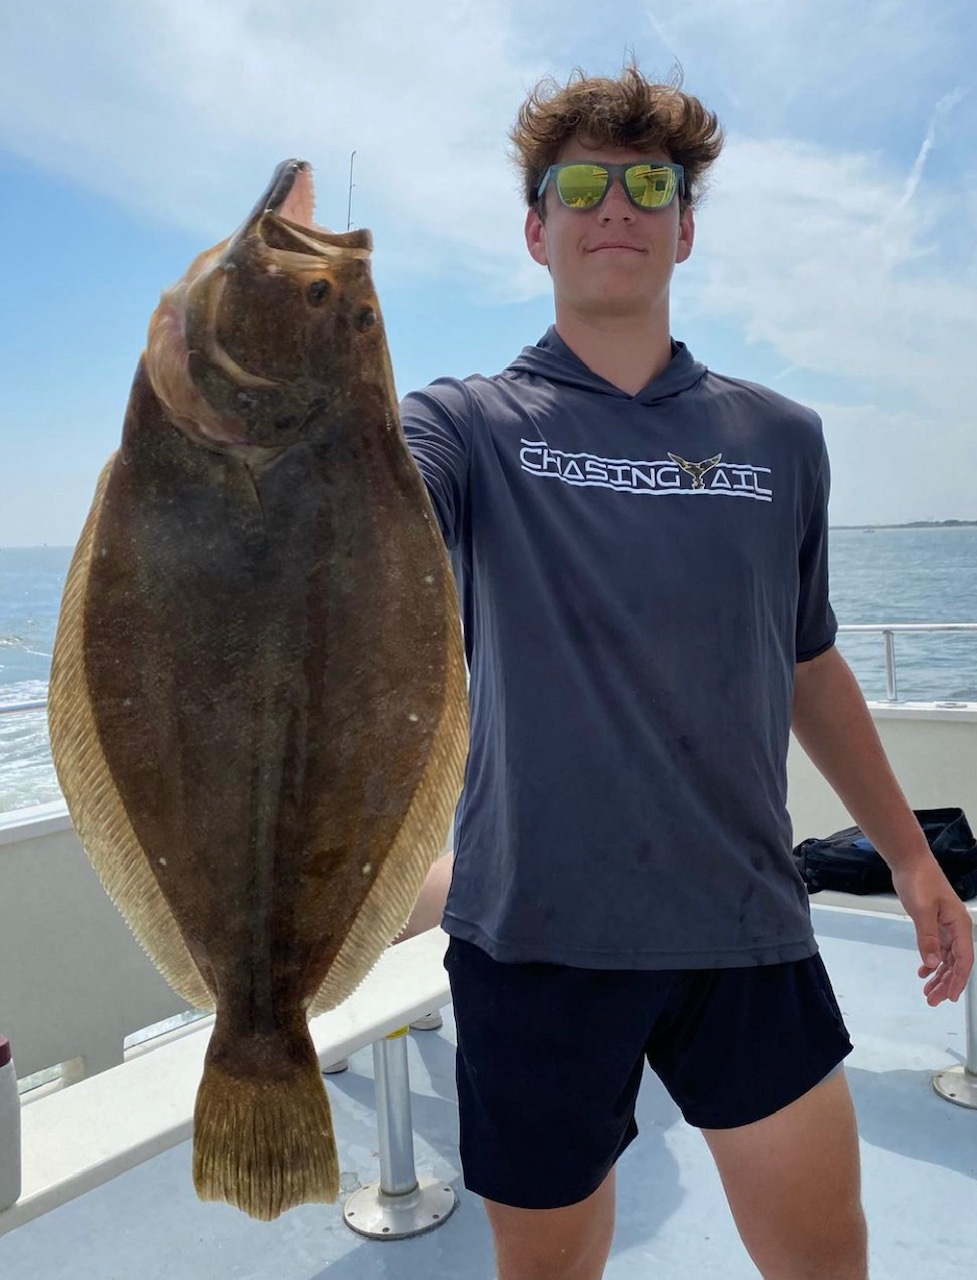 Ben caught this nice keeper fluke from the Miss Beach Haven with